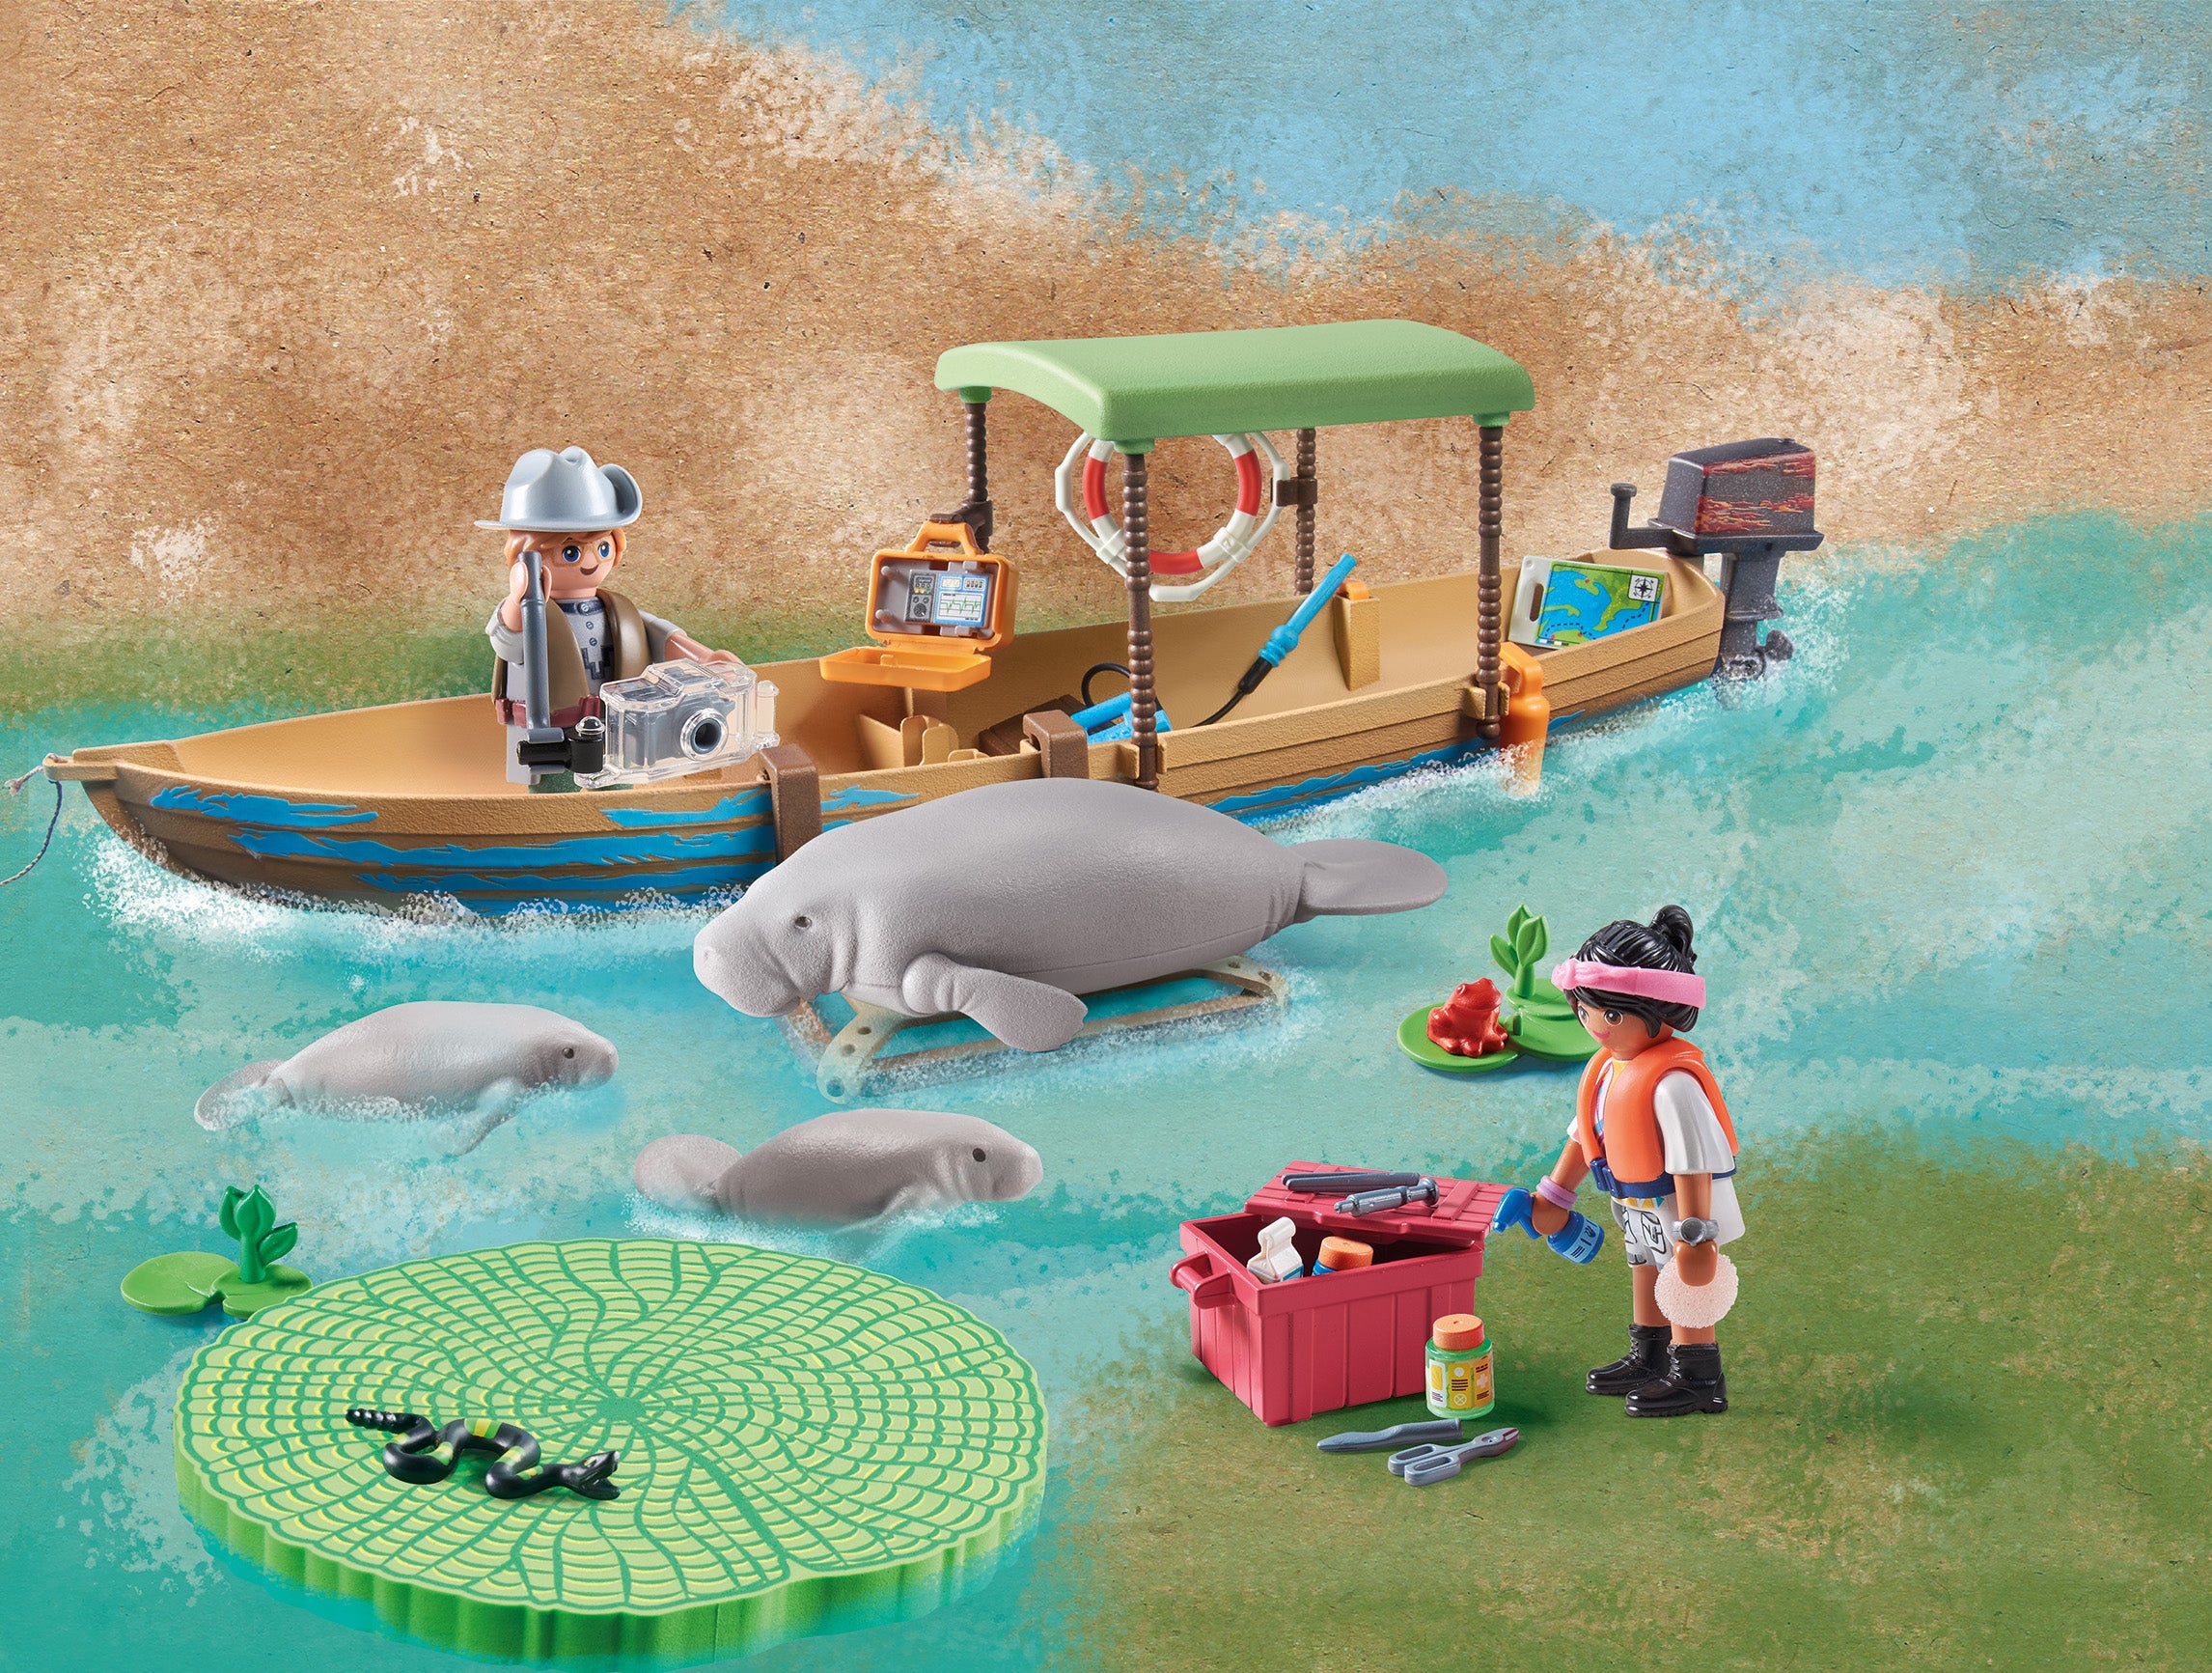 PLAYMOBIL Wiltopia 71403 Excursion to the Animals of America, Sustainable  Toys, from 4 years